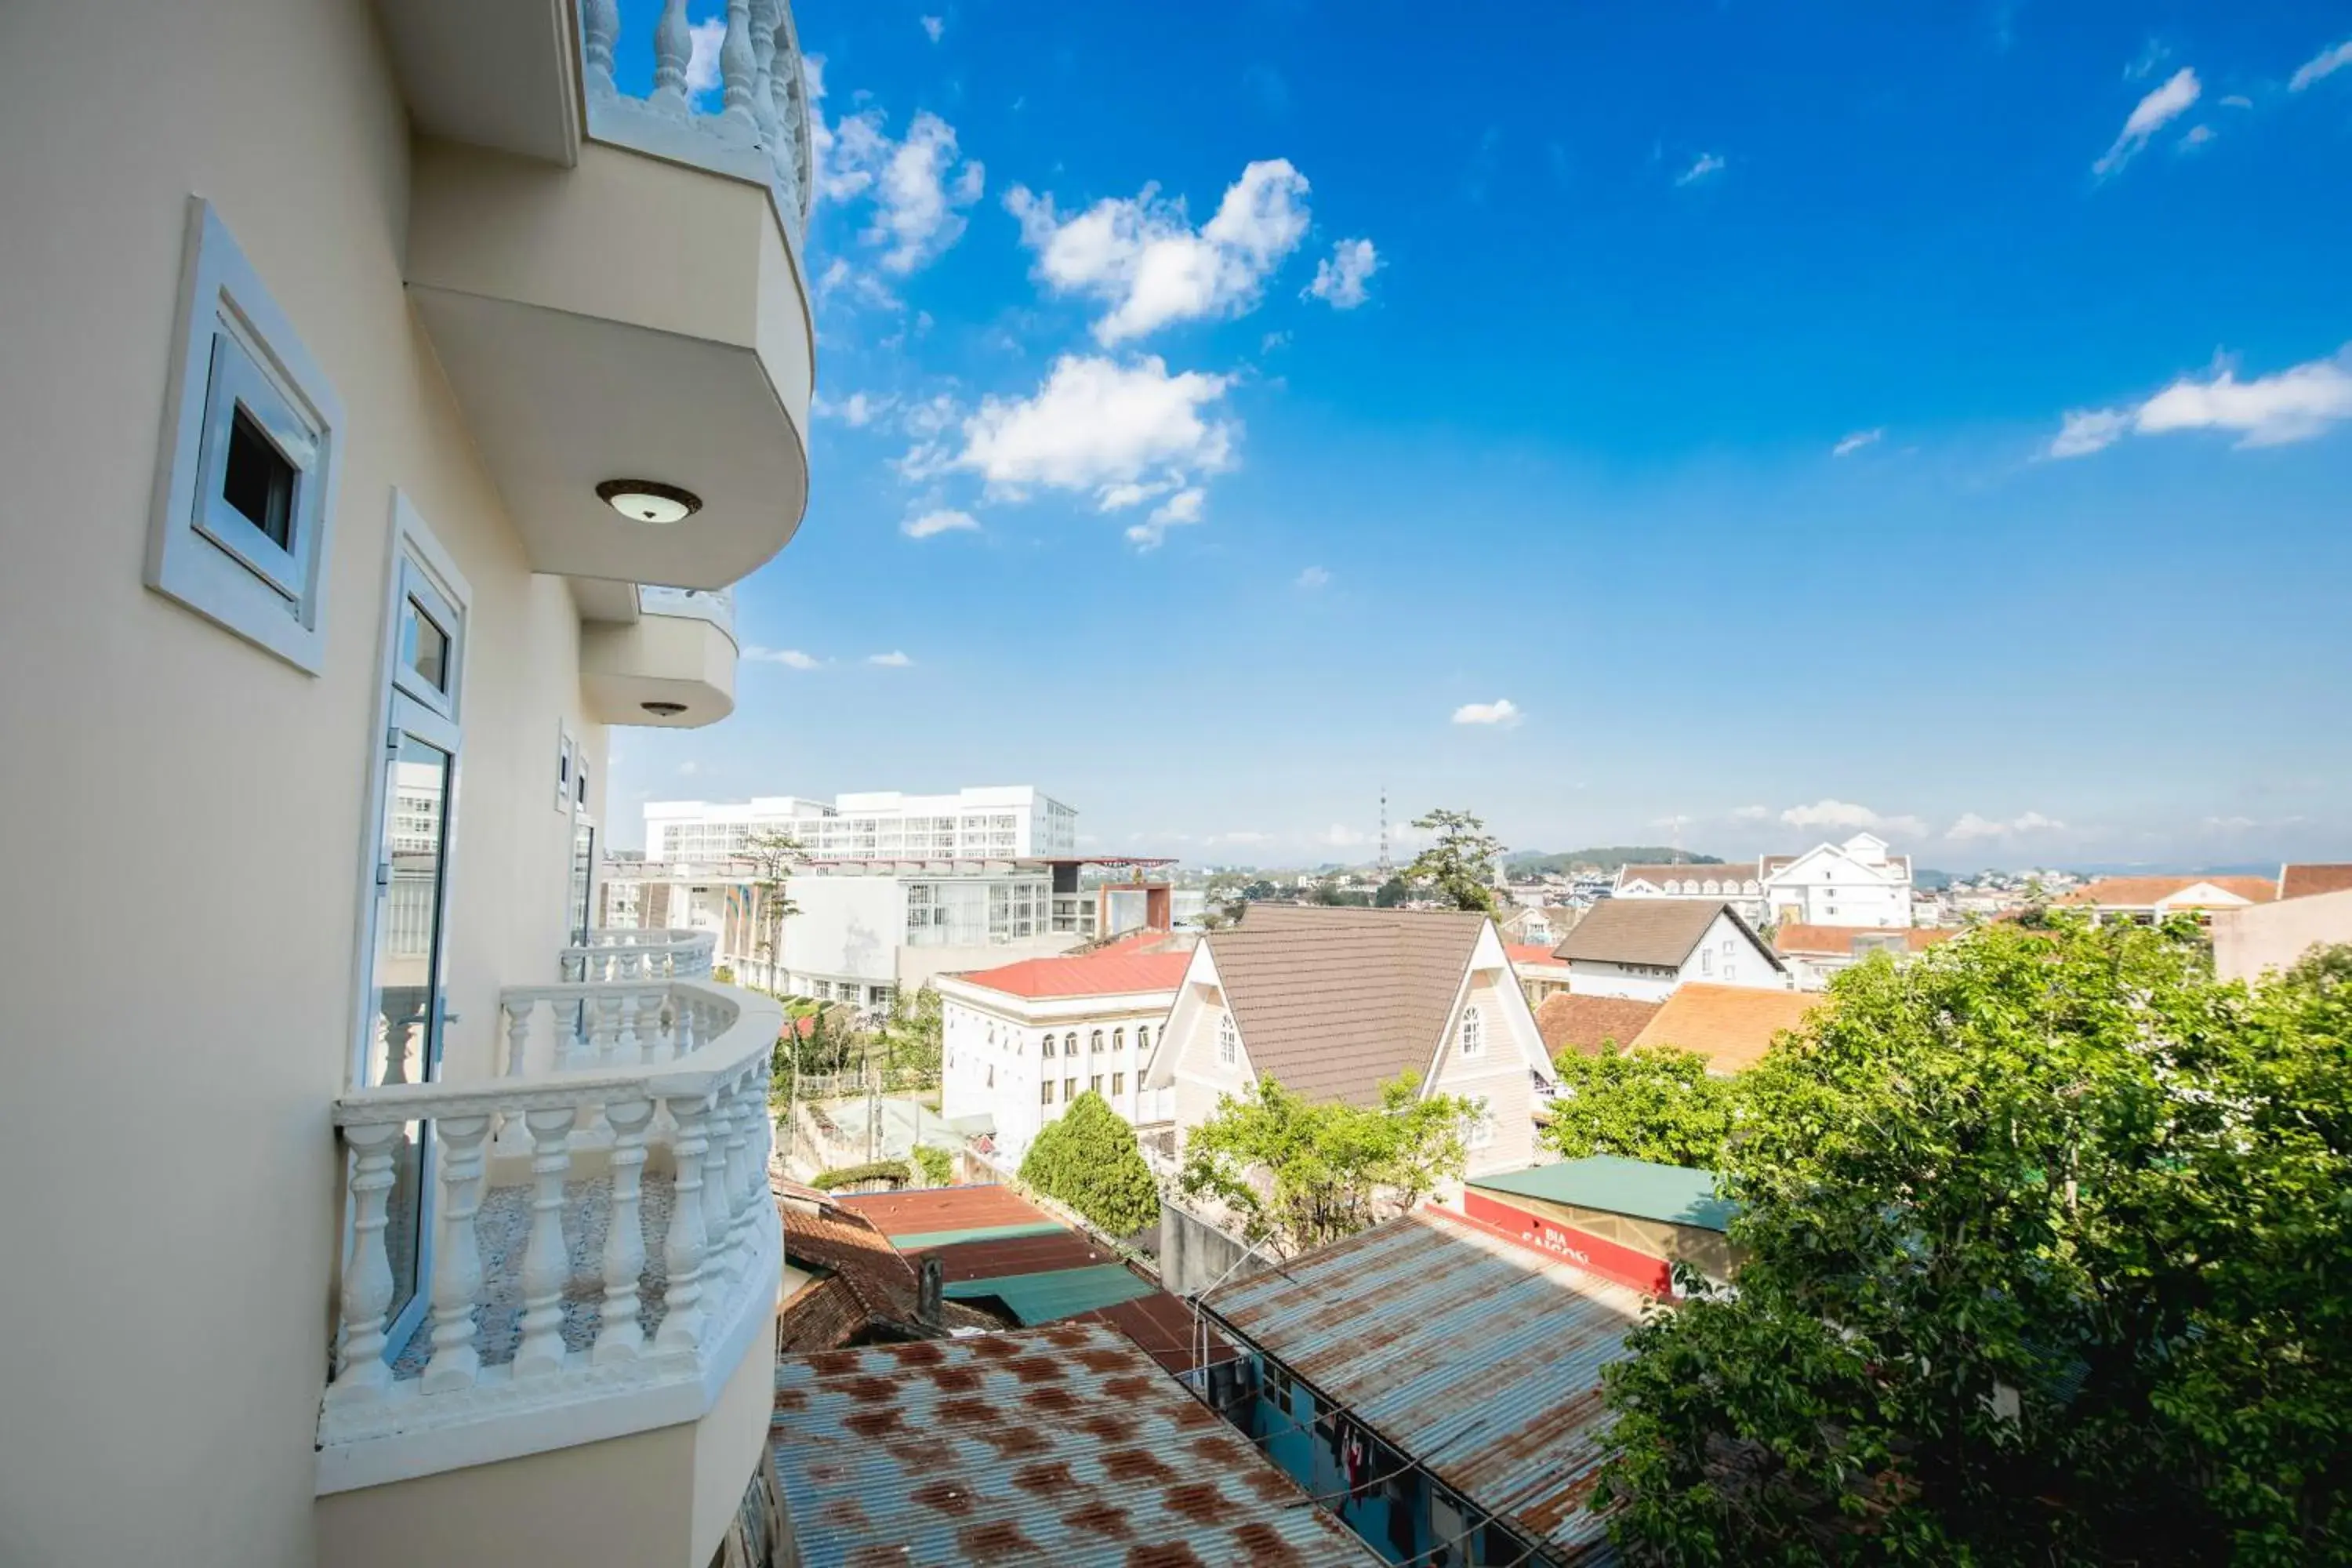 Property building in Dalat Boutique Hotel